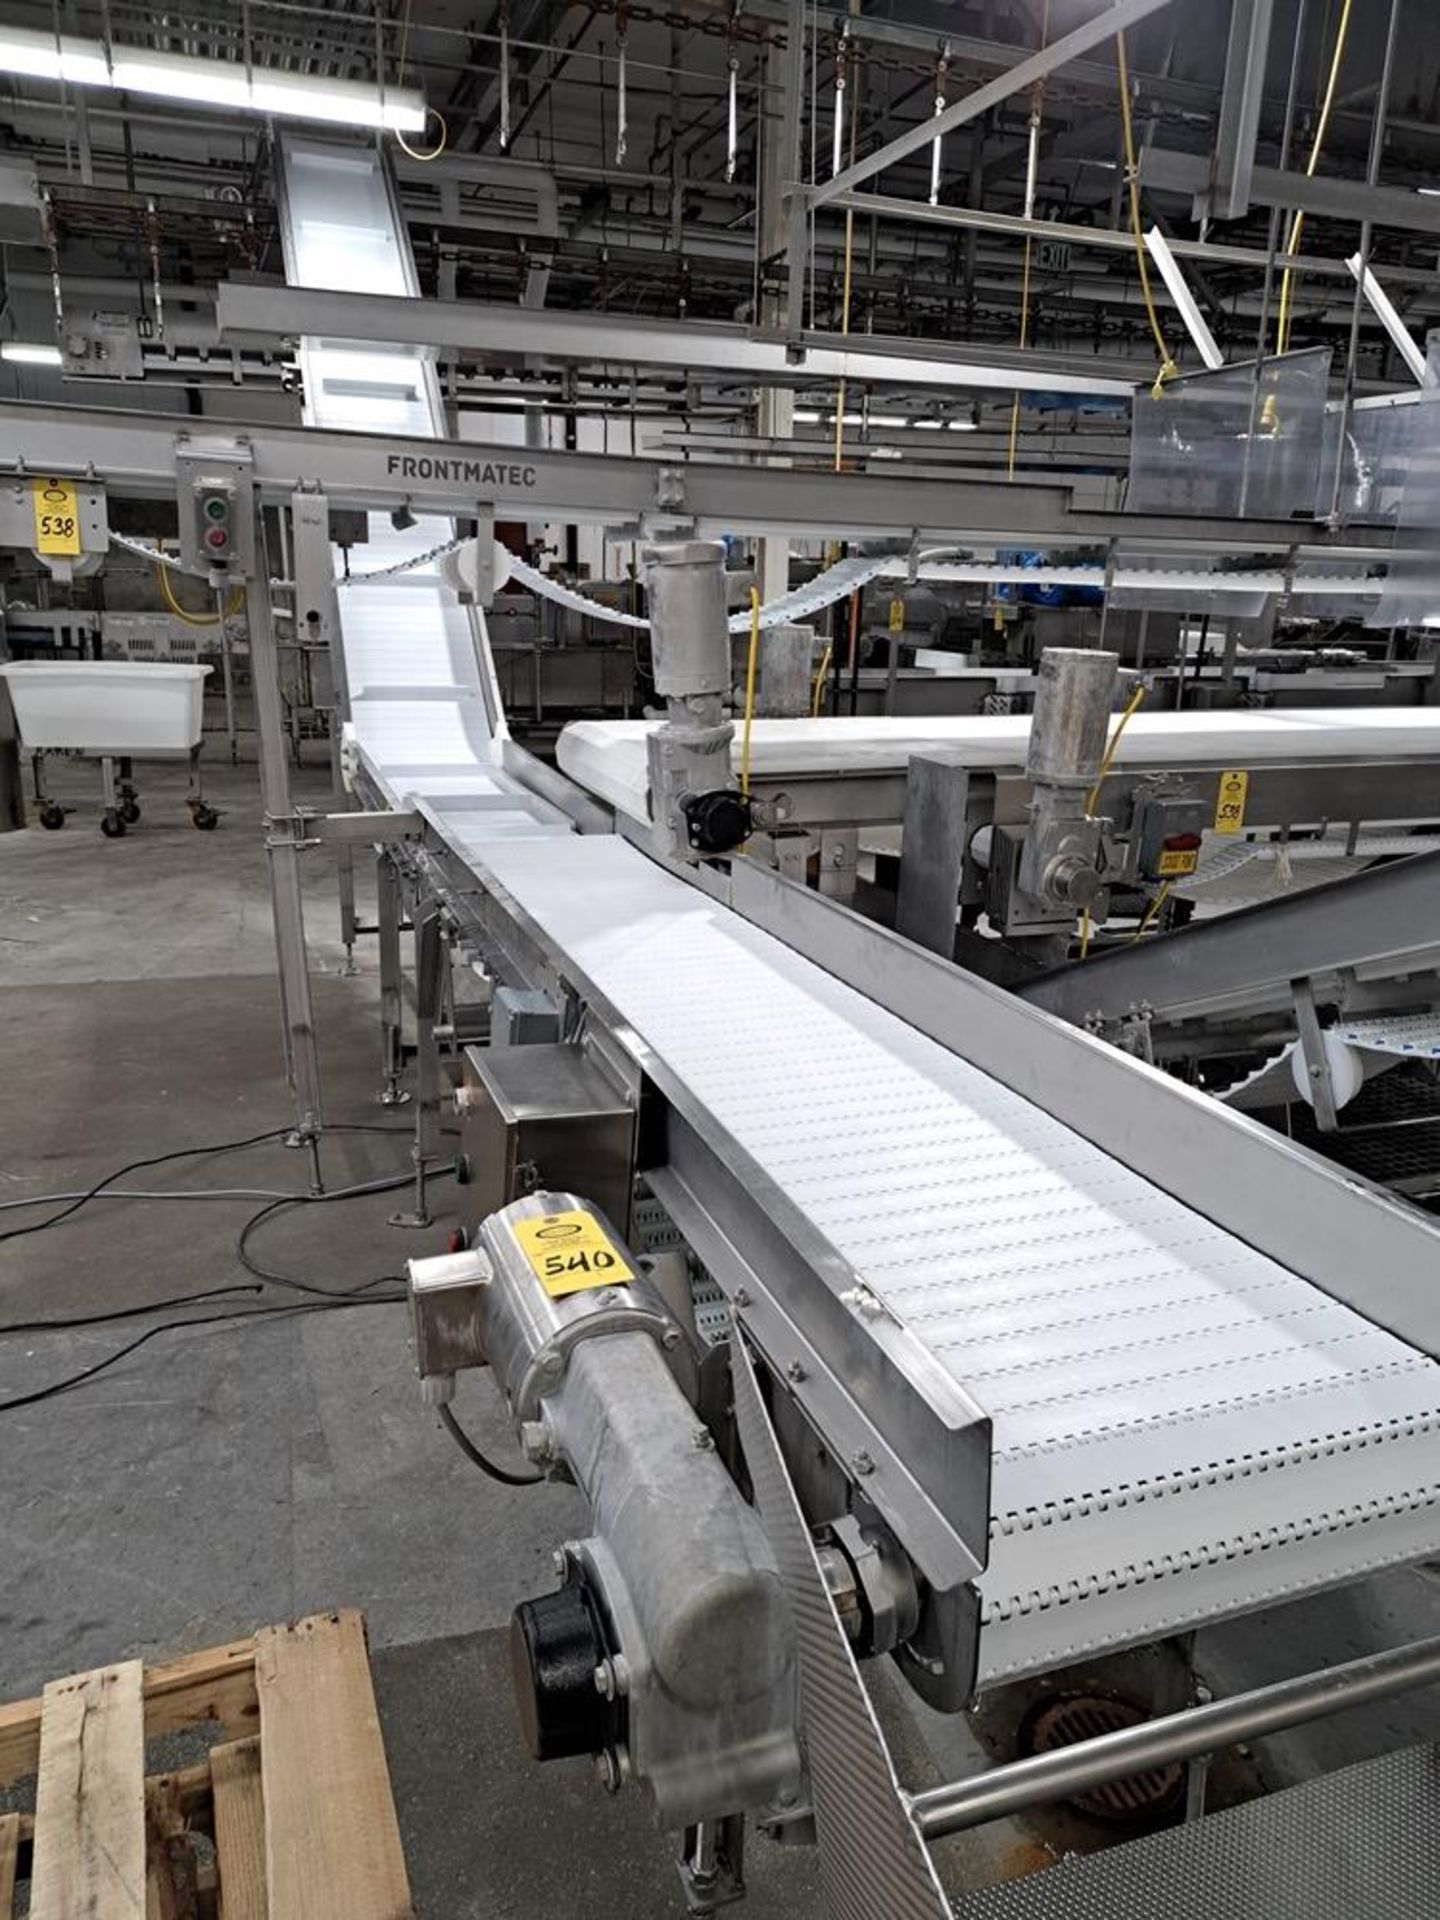 Stainless Steel Conveyor, 20" W X 32' L, 13' discharge, flighted belt, stainless steel, 230/460 volt